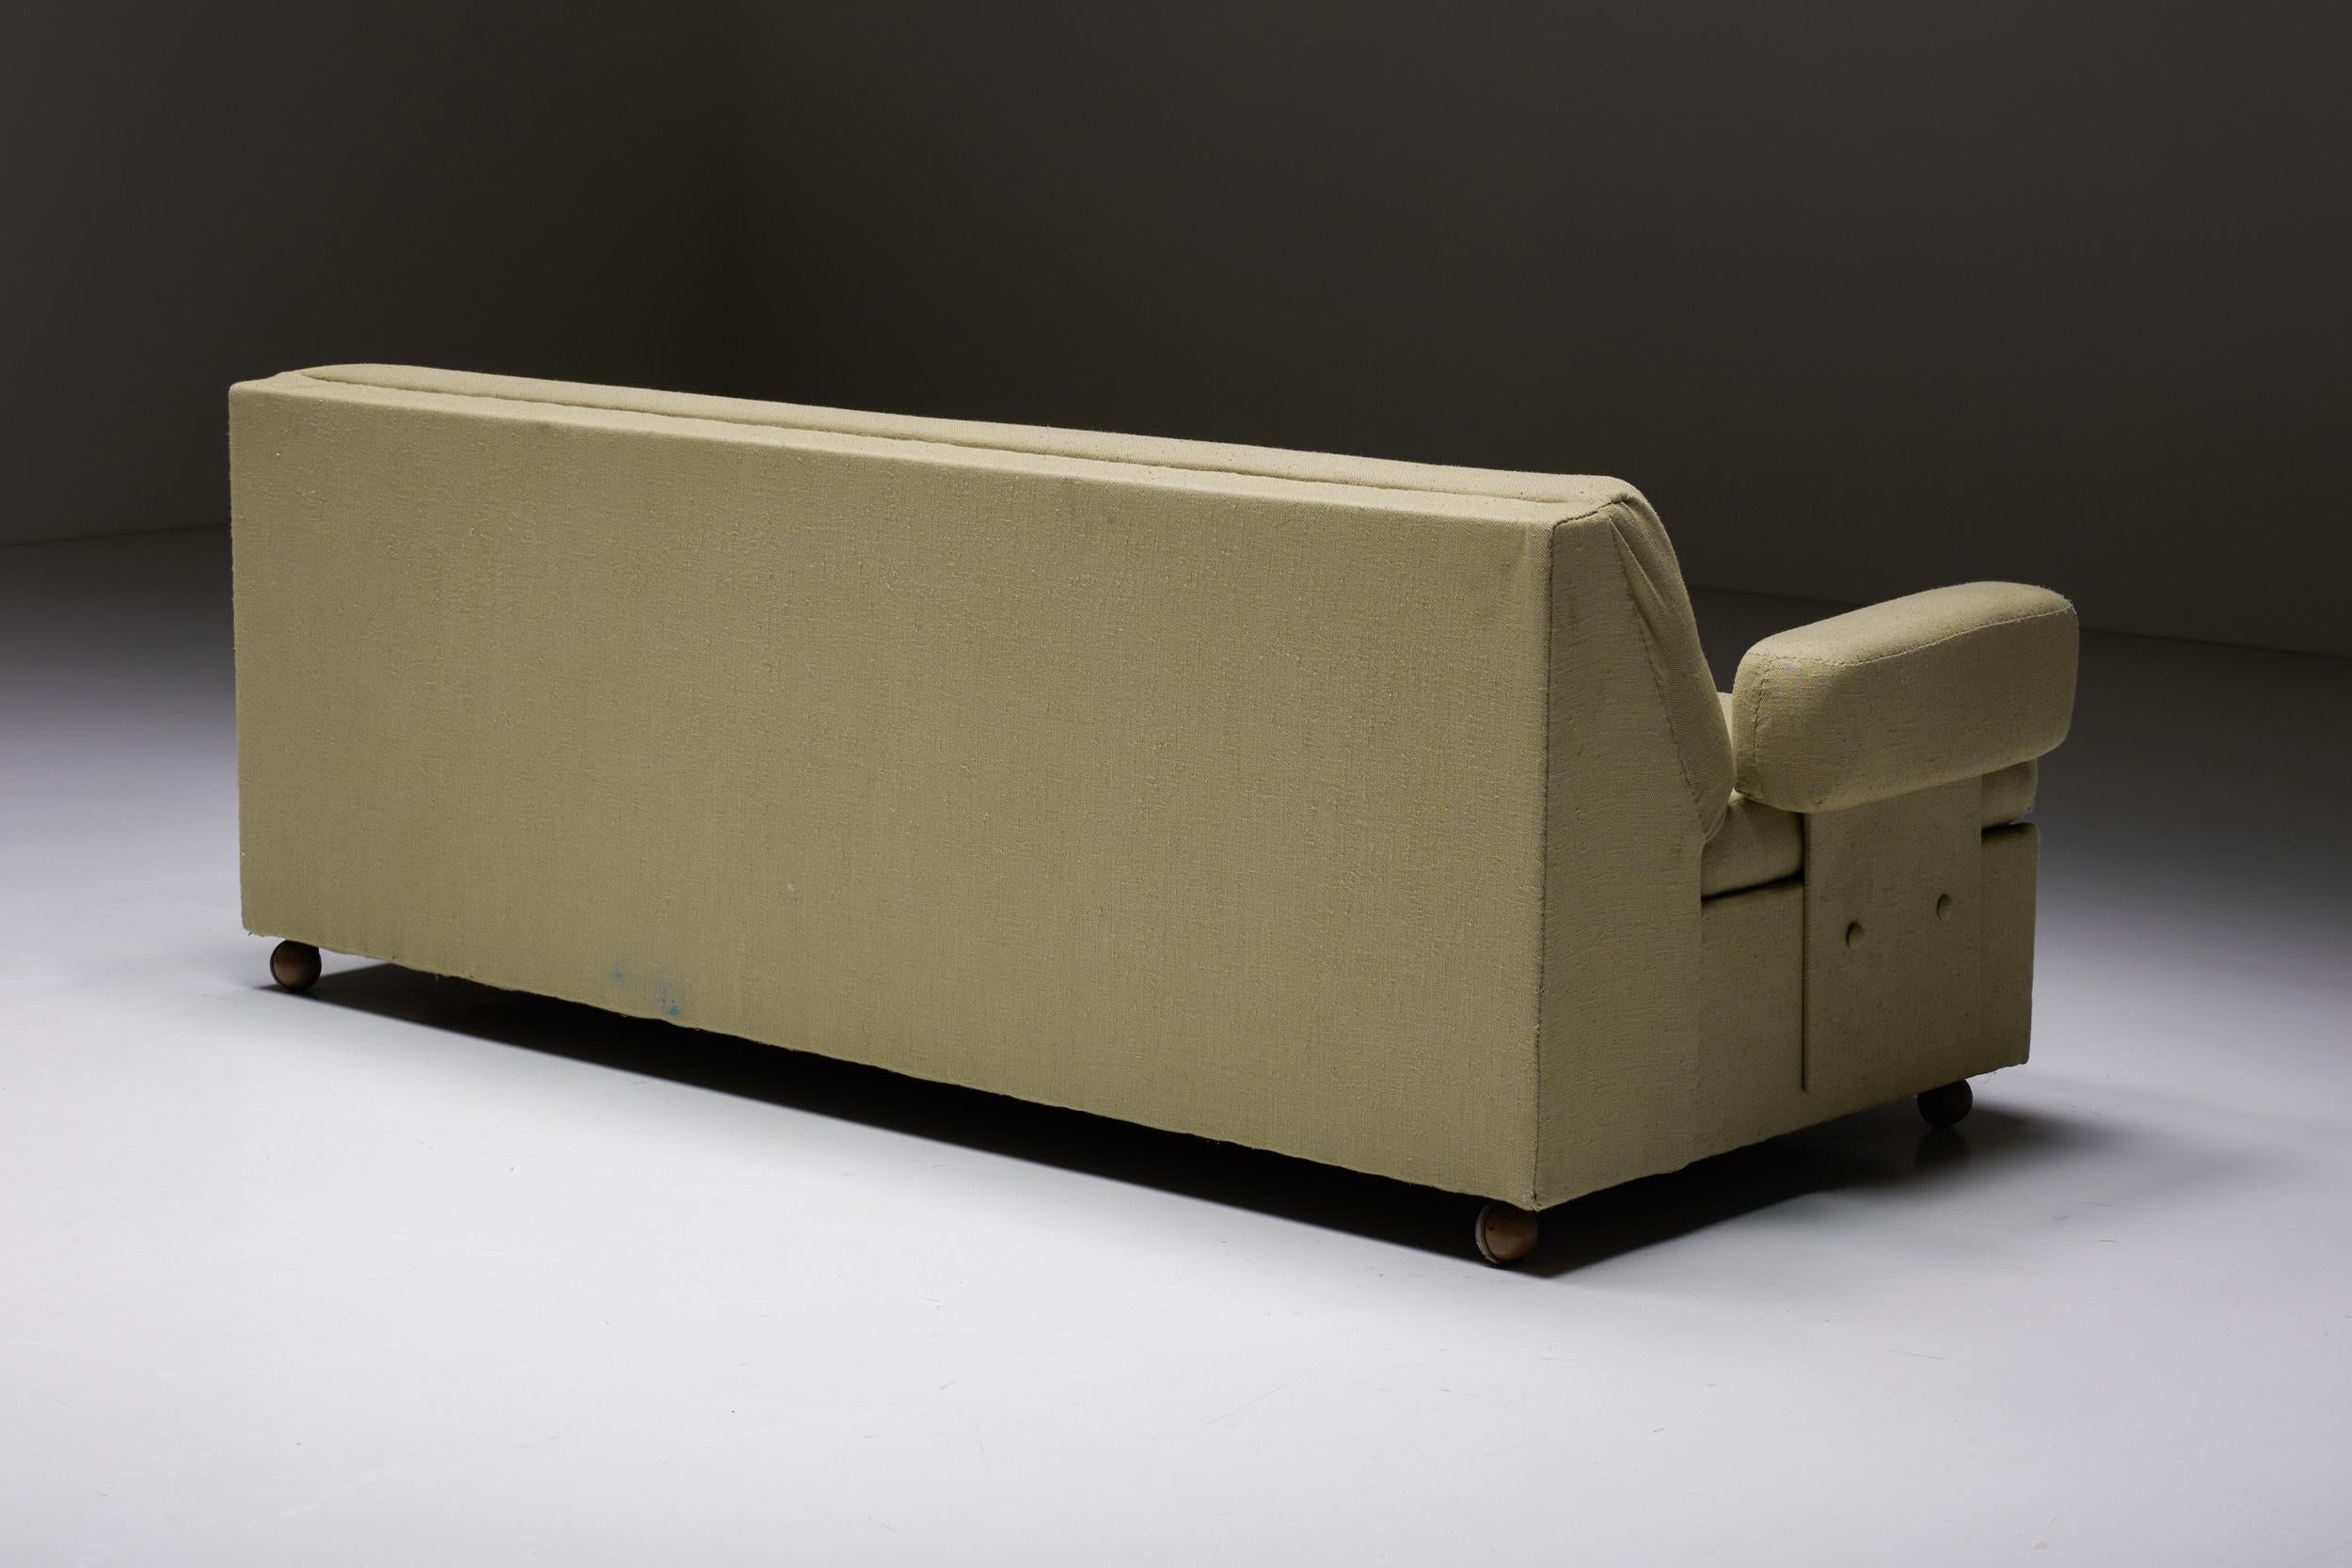 Fabric Sofa Daybed in Green Upholstery, Seng Company, Germany, 1930s For Sale